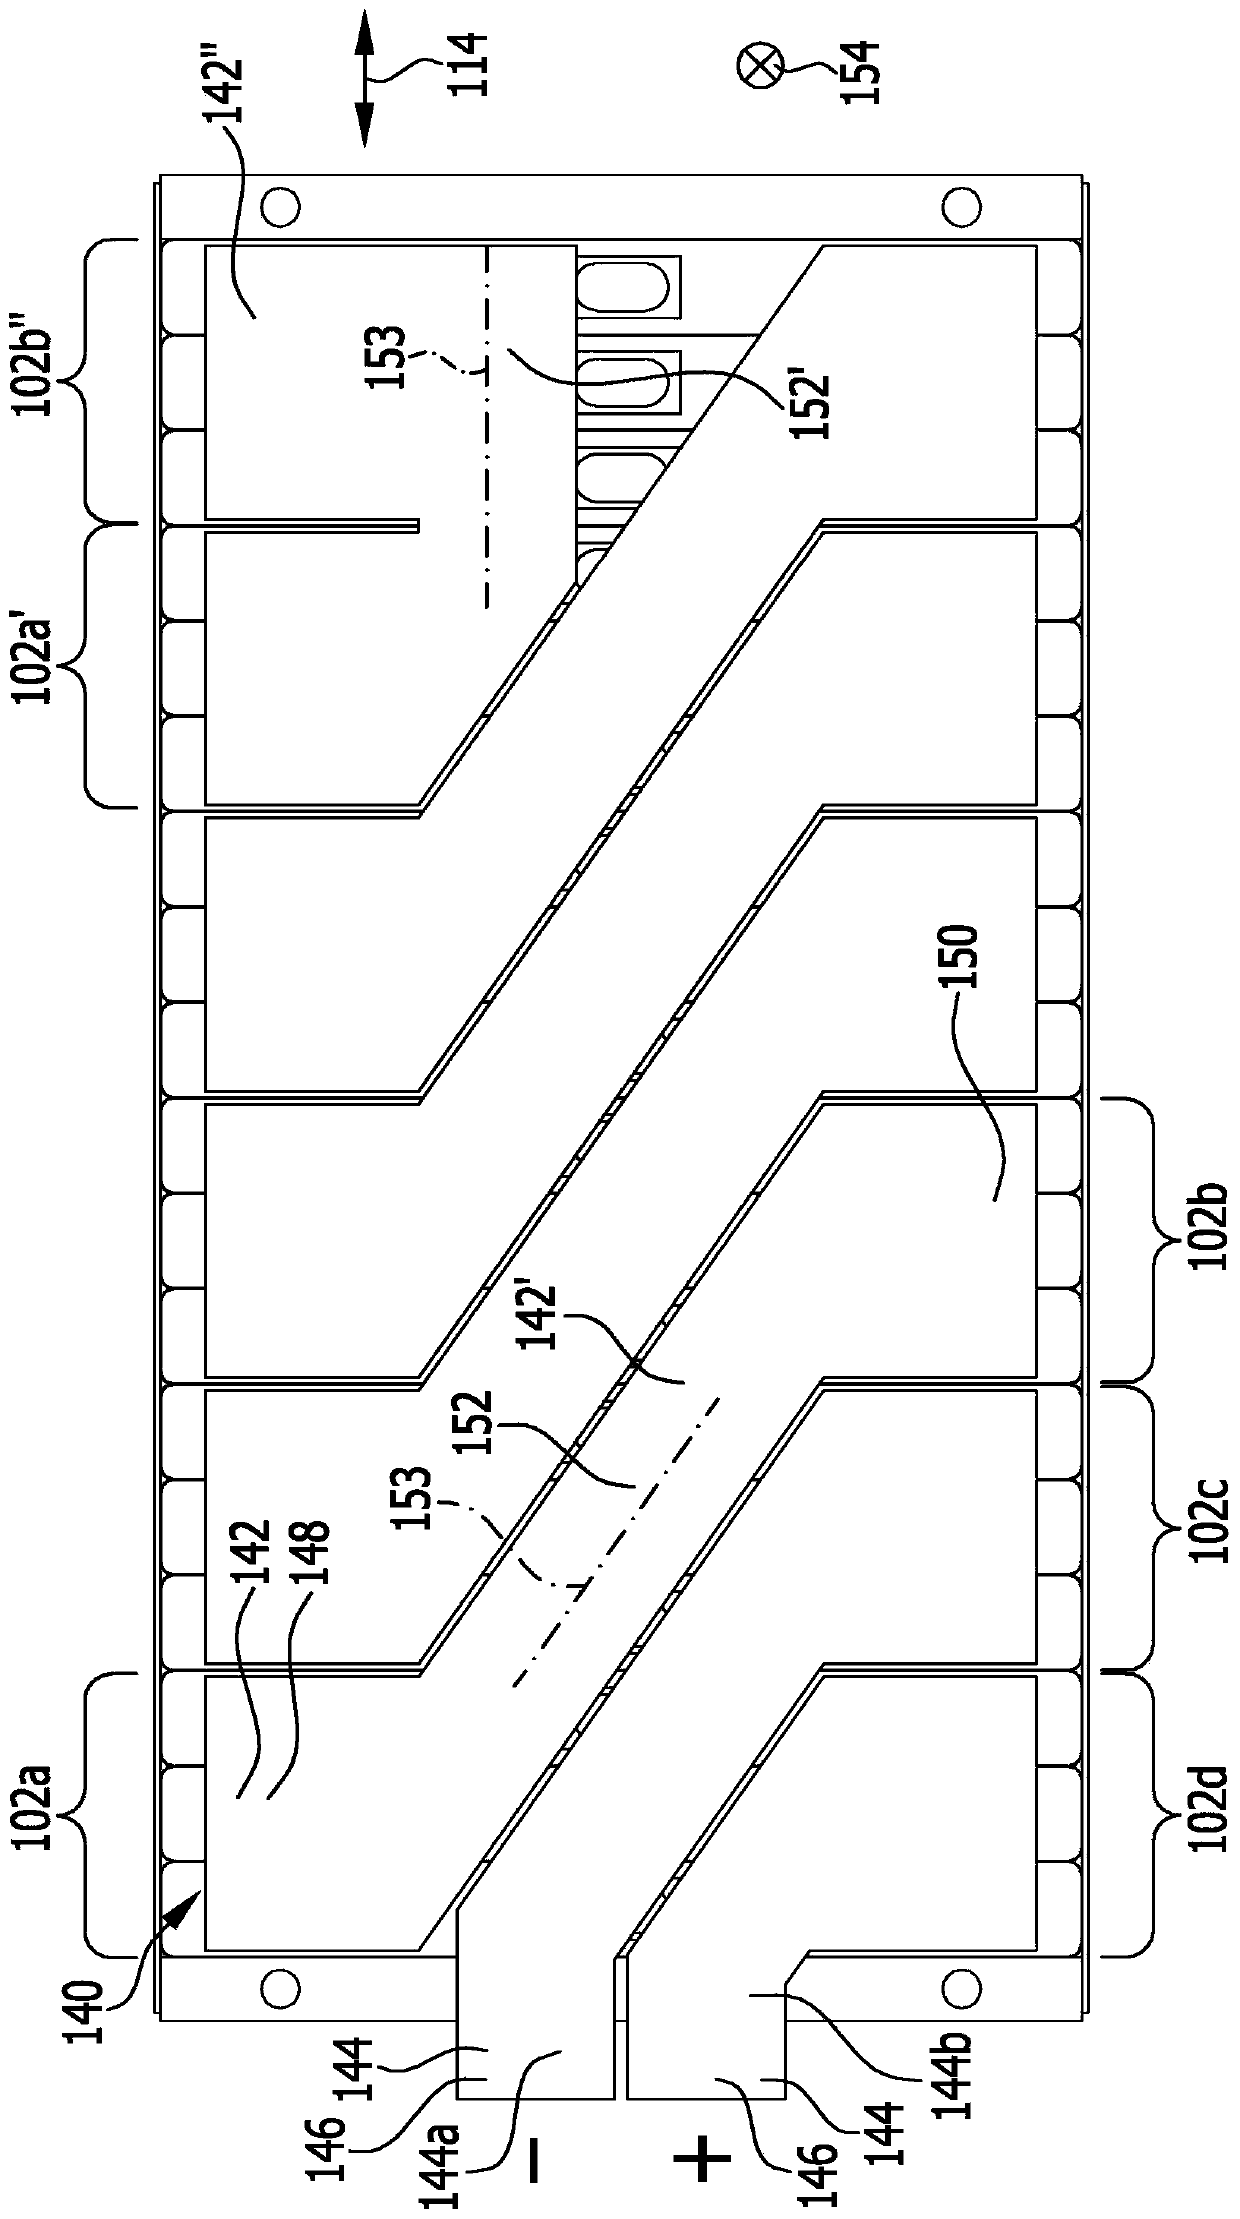 Cell contacting system for an electrochemical device